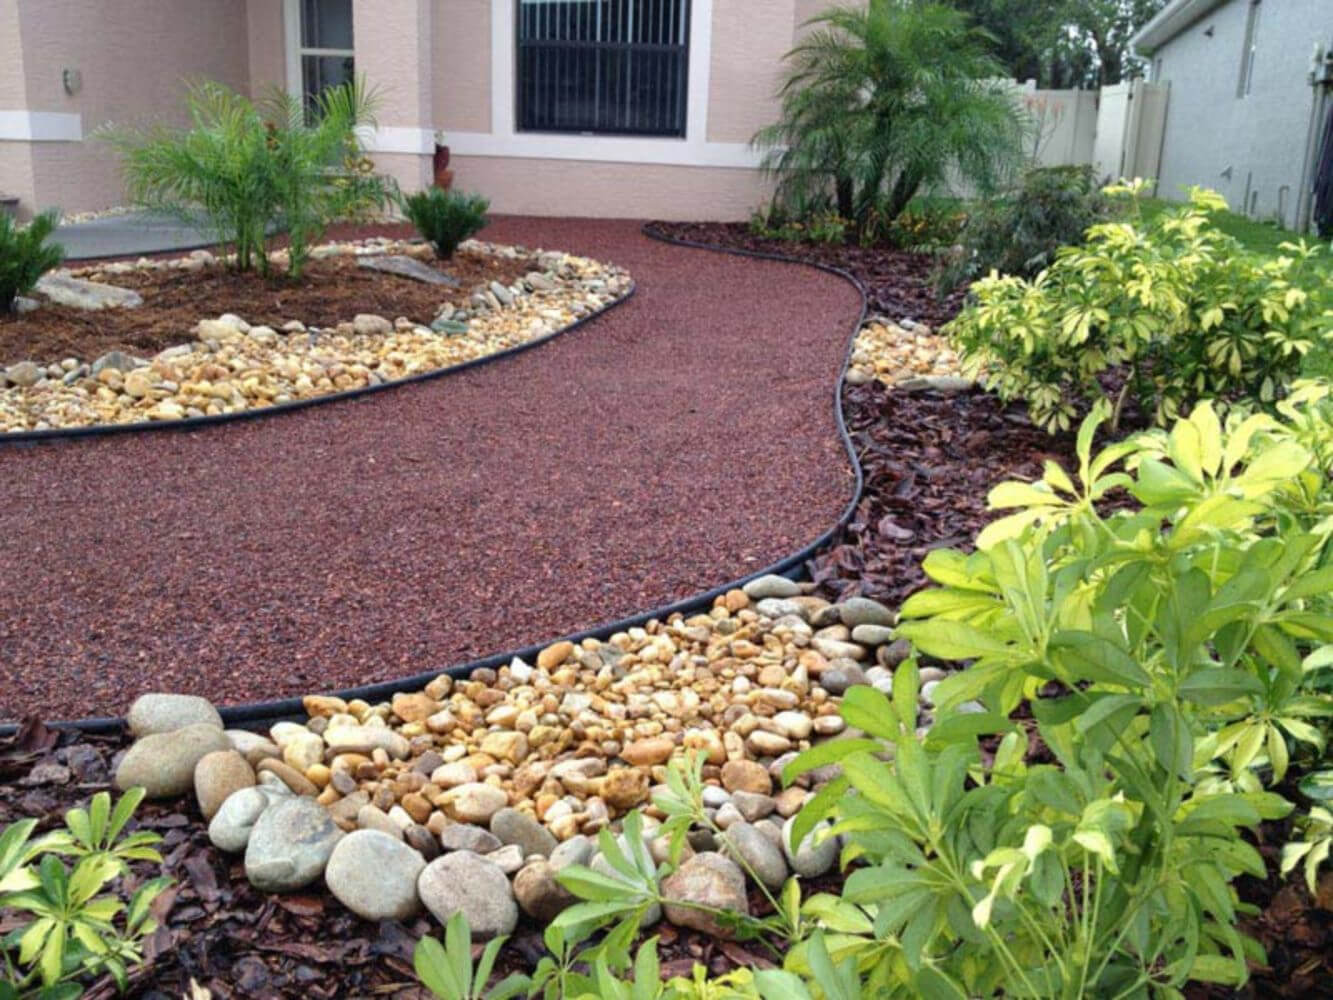 Landscaping Design Ideas Without Grass, Small Front Yard Landscaping Ideas No Grass